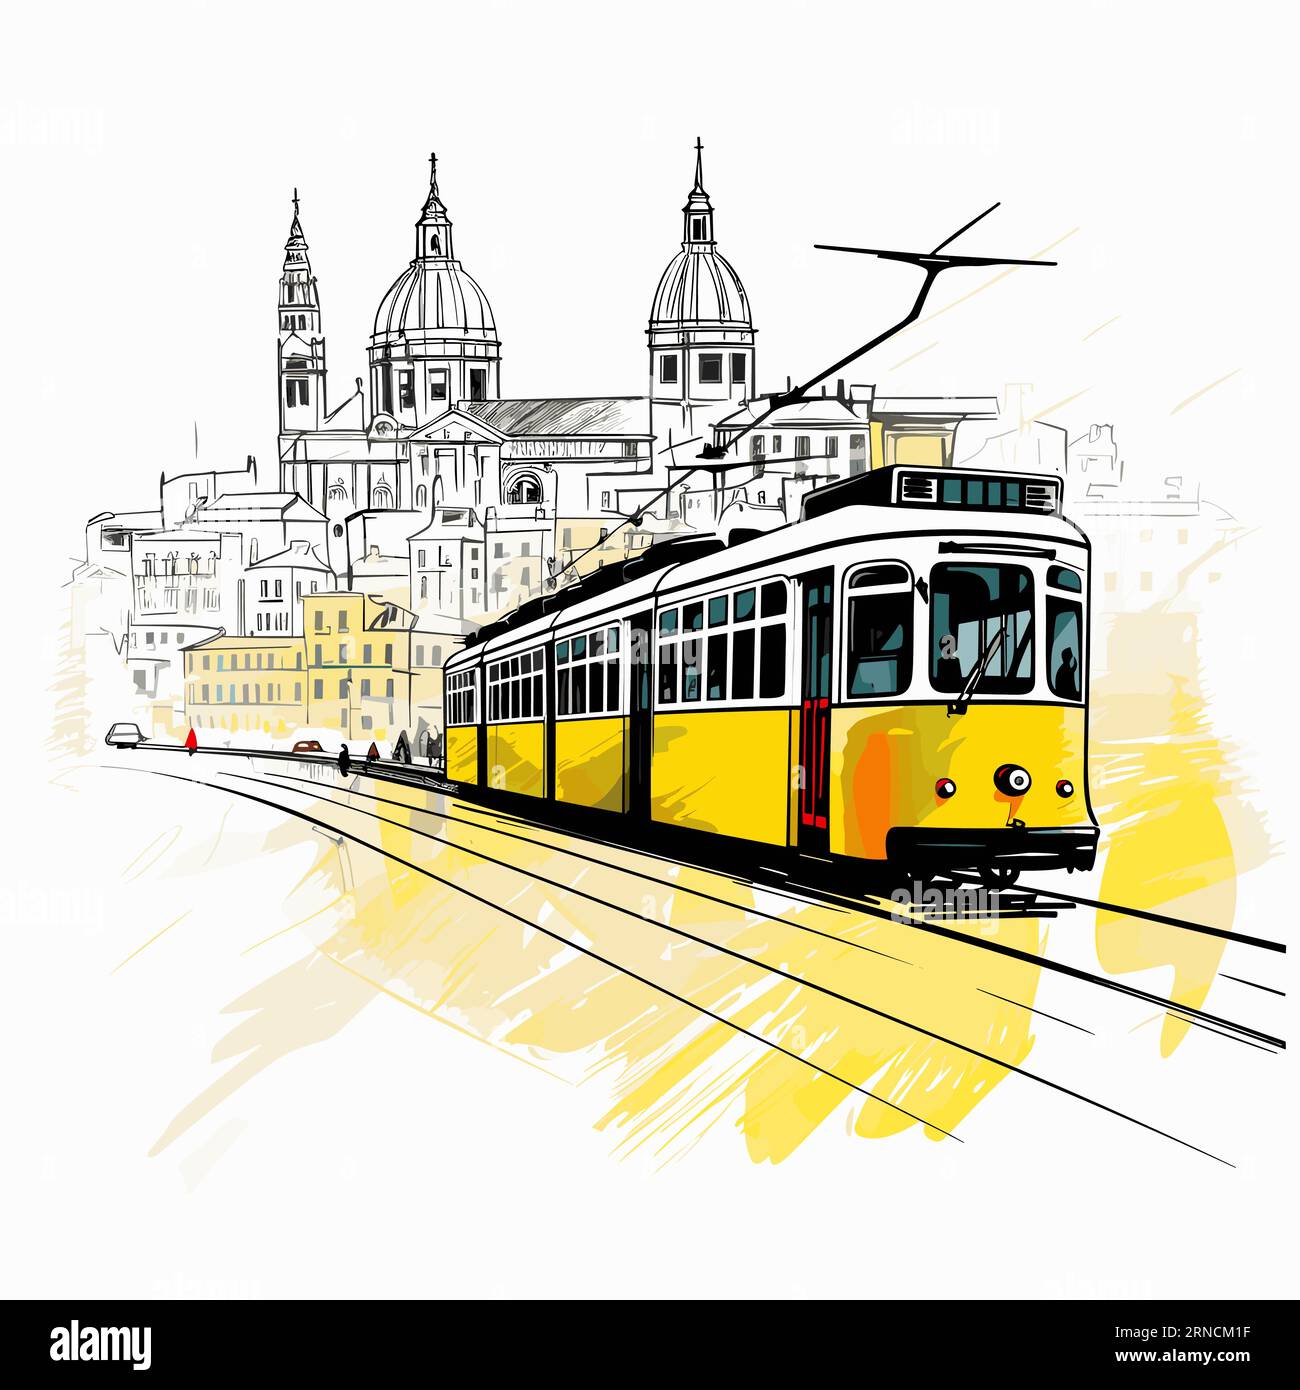 The Image Shows Tram Over Cities, In The Style Of Nostalgic Illustration, Baroque Brushwork, Yellow And Emerald, Simple Line Work, Serene Watercolors Stock Vector